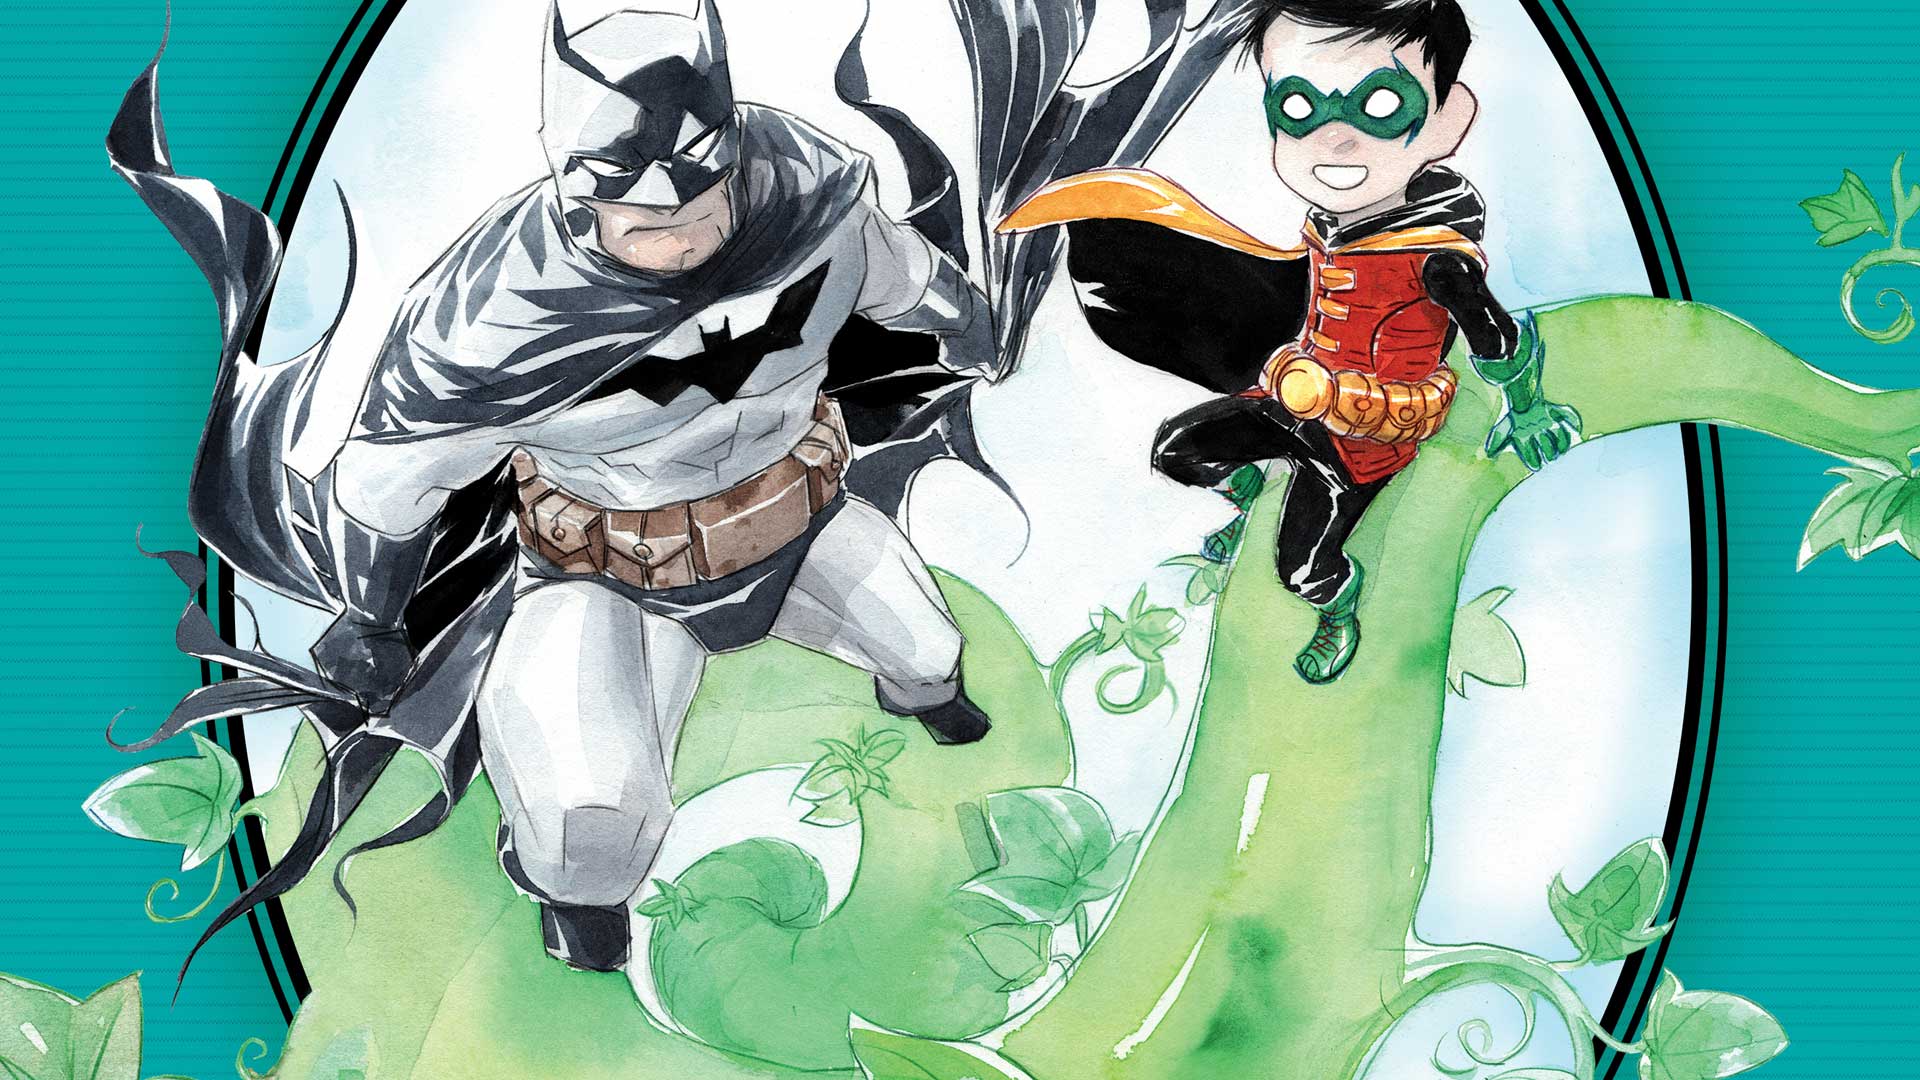 DC announces robust new YA and Middle Grade lineup featuring Wonder Woman, Teen Titans, and more